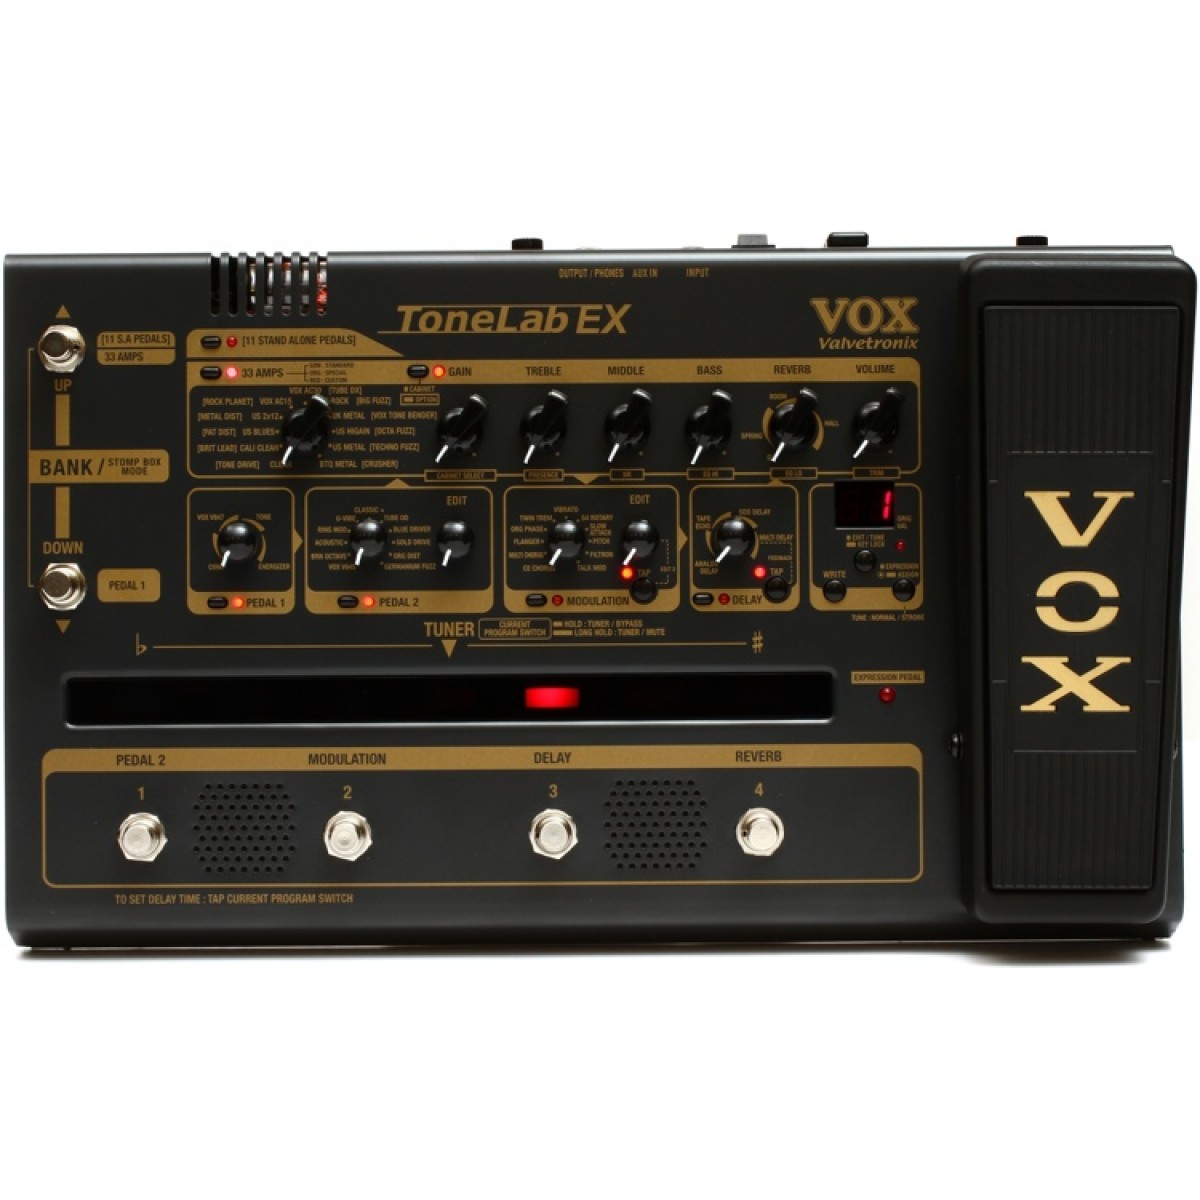 Vox TONELAB-EX | Buy Guitar Multi-Effects and Amp Modeling Pedal